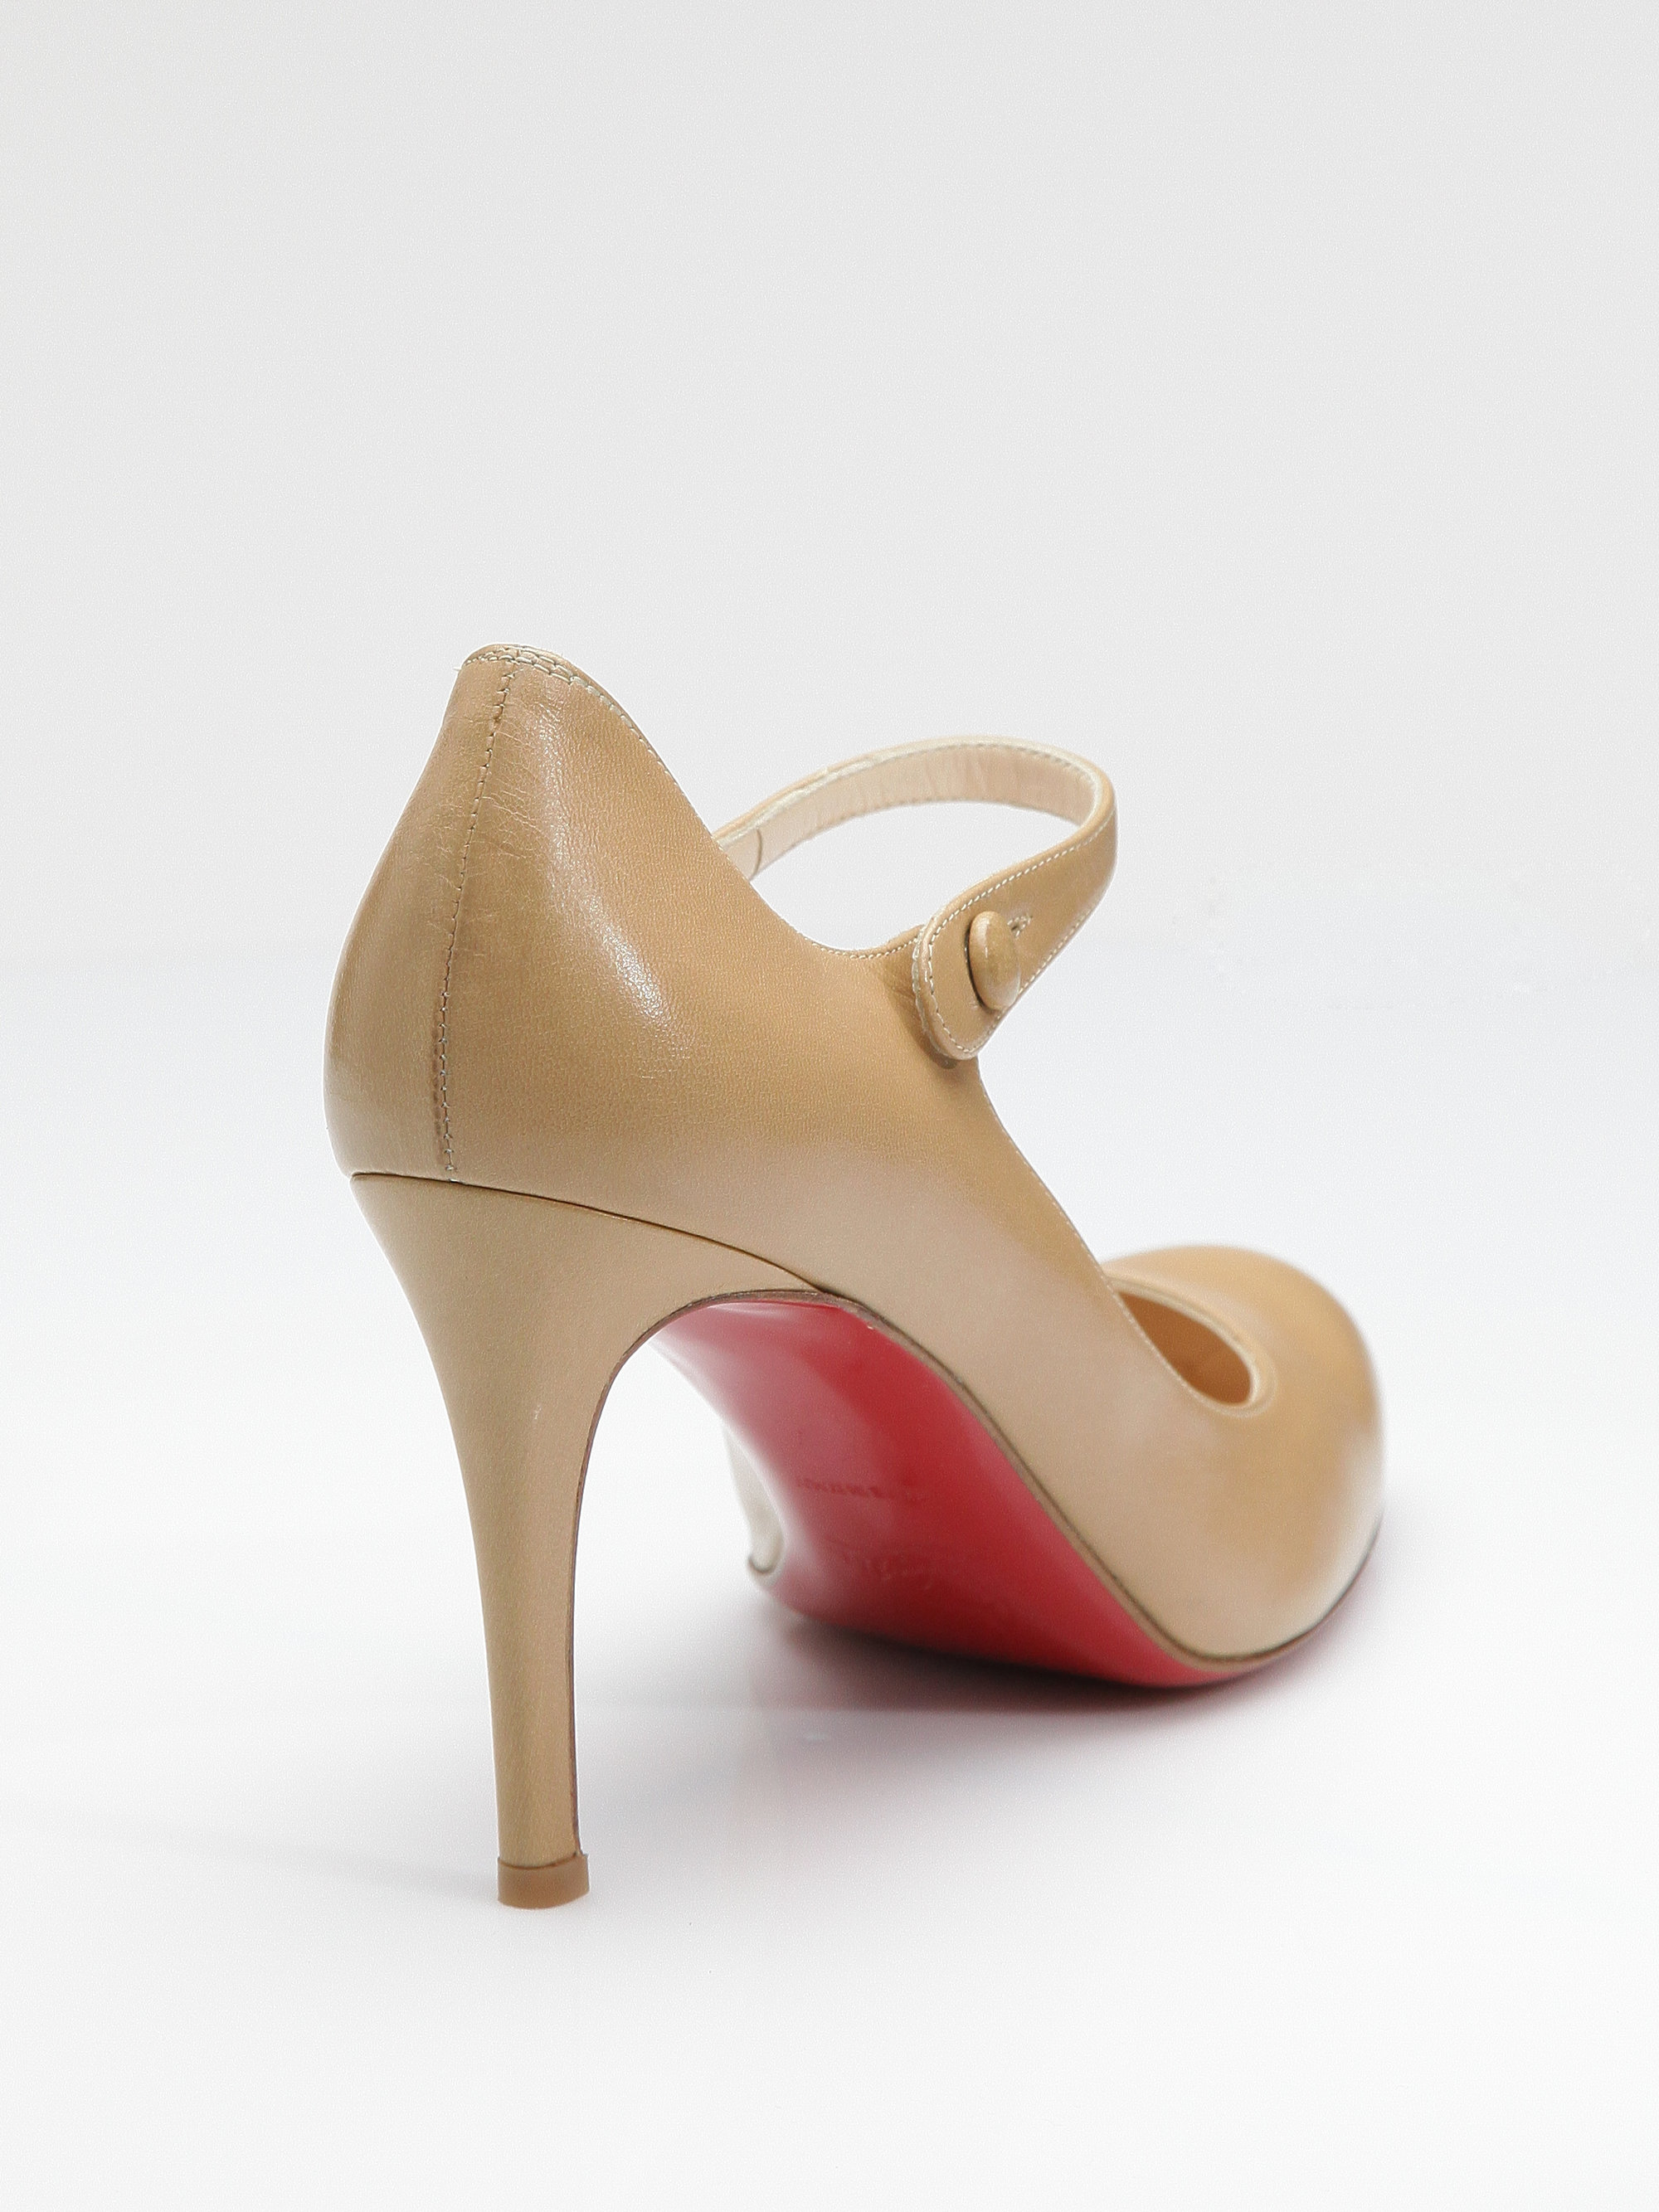 Christian Louboutin Corto Mary Jane Pumps in Beige (Natural) - Lyst